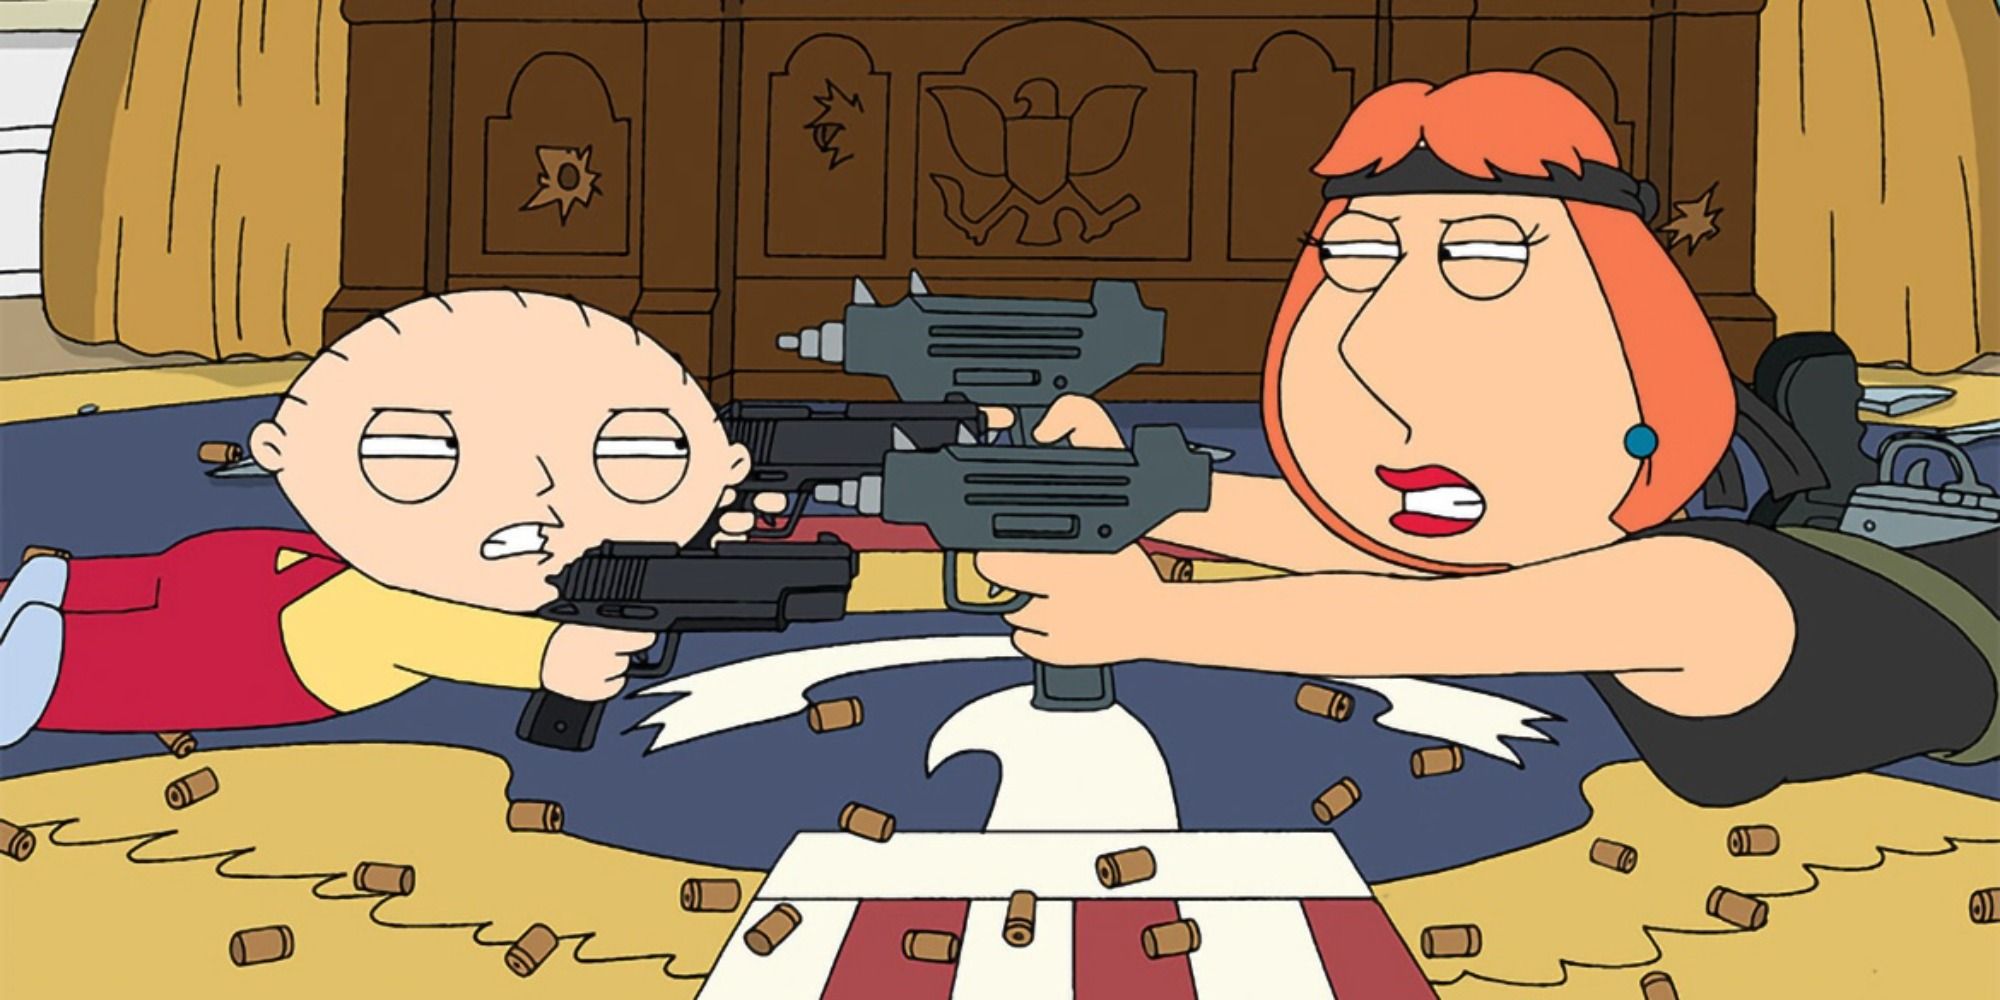 Stewie and Lois with guns